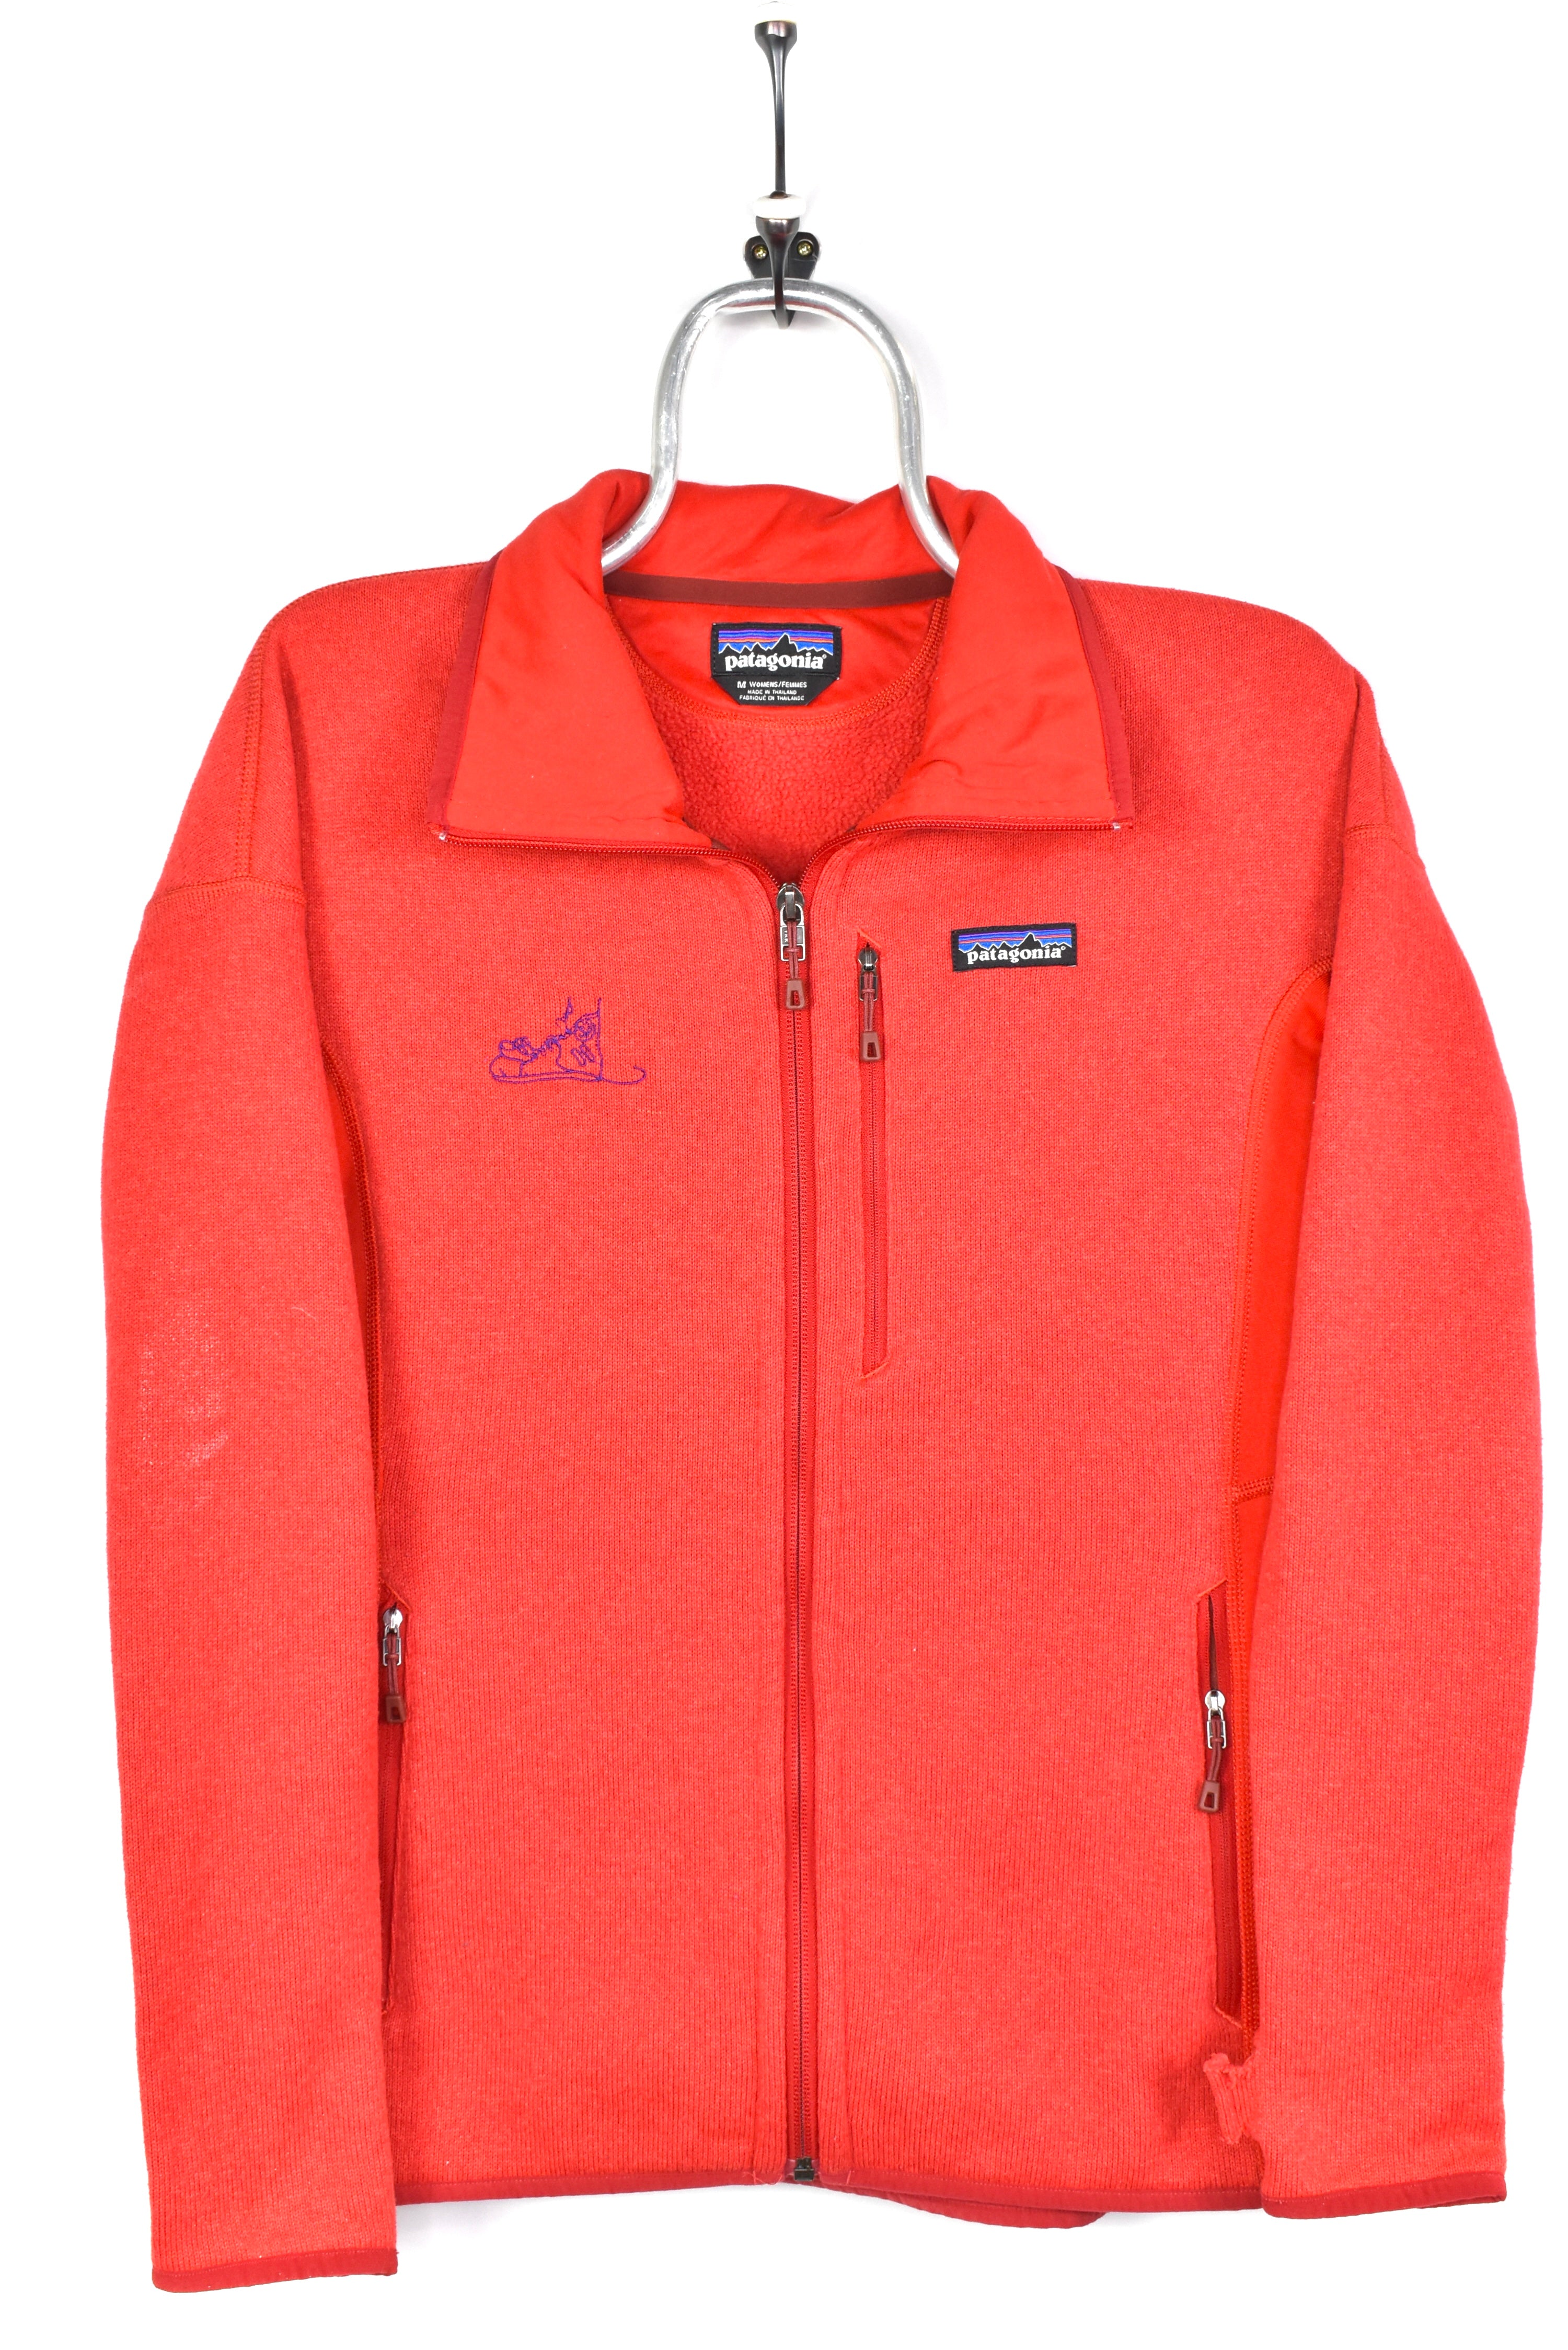 VINTAGE WOMEN'S PATAGONIA RED JACKET | MEDIUM THE NORTH FACE